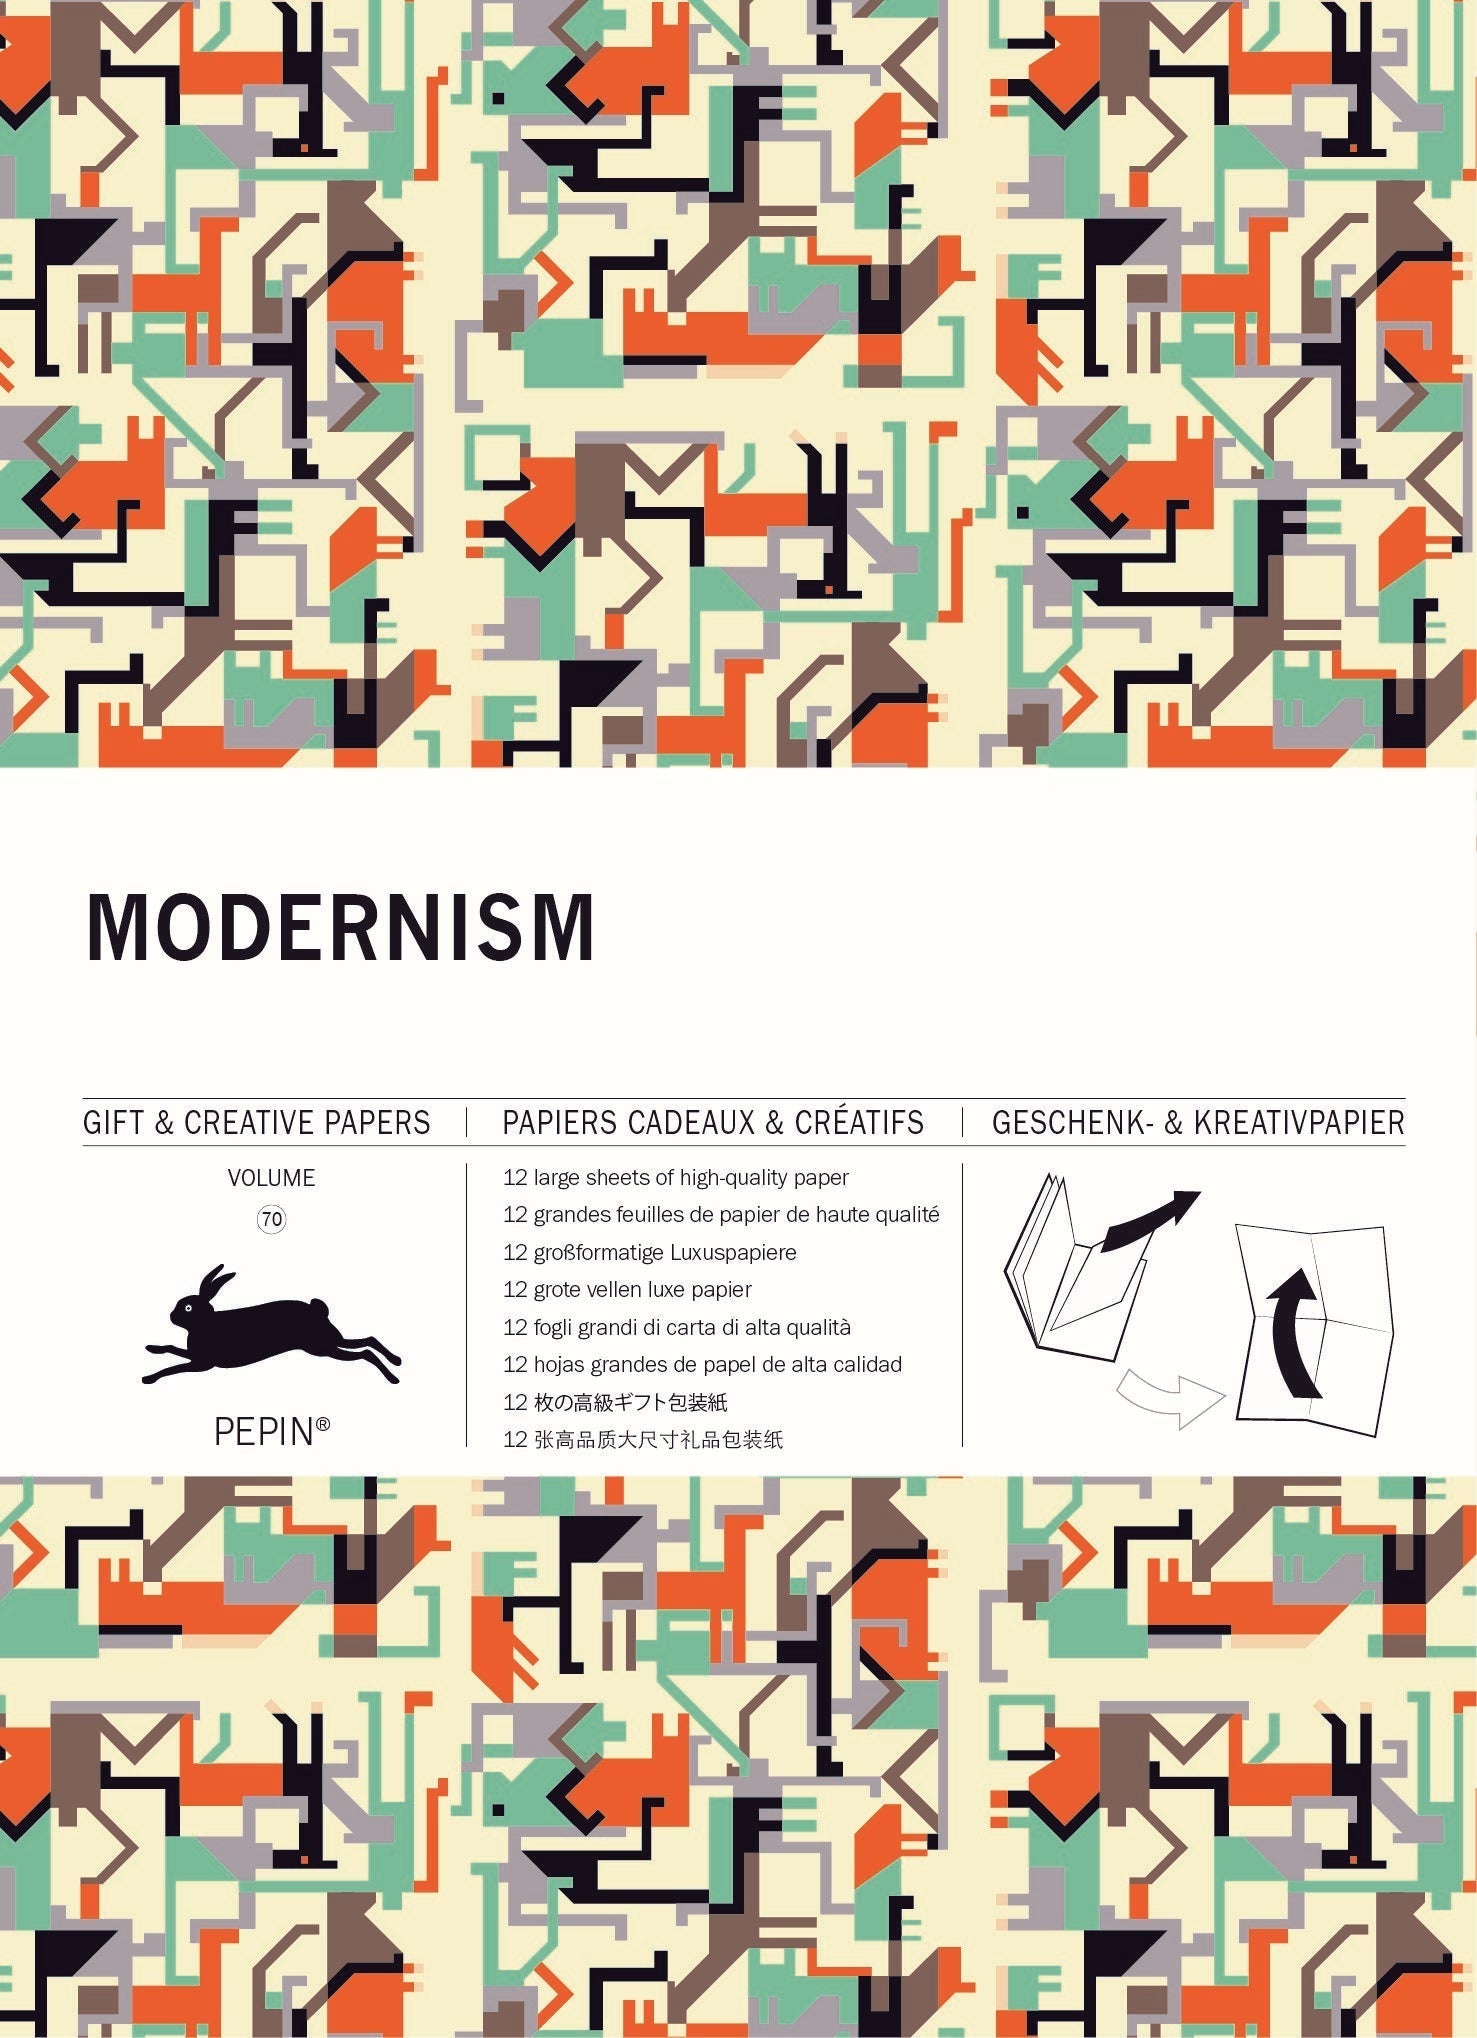 Gift & creative papers - Modernism